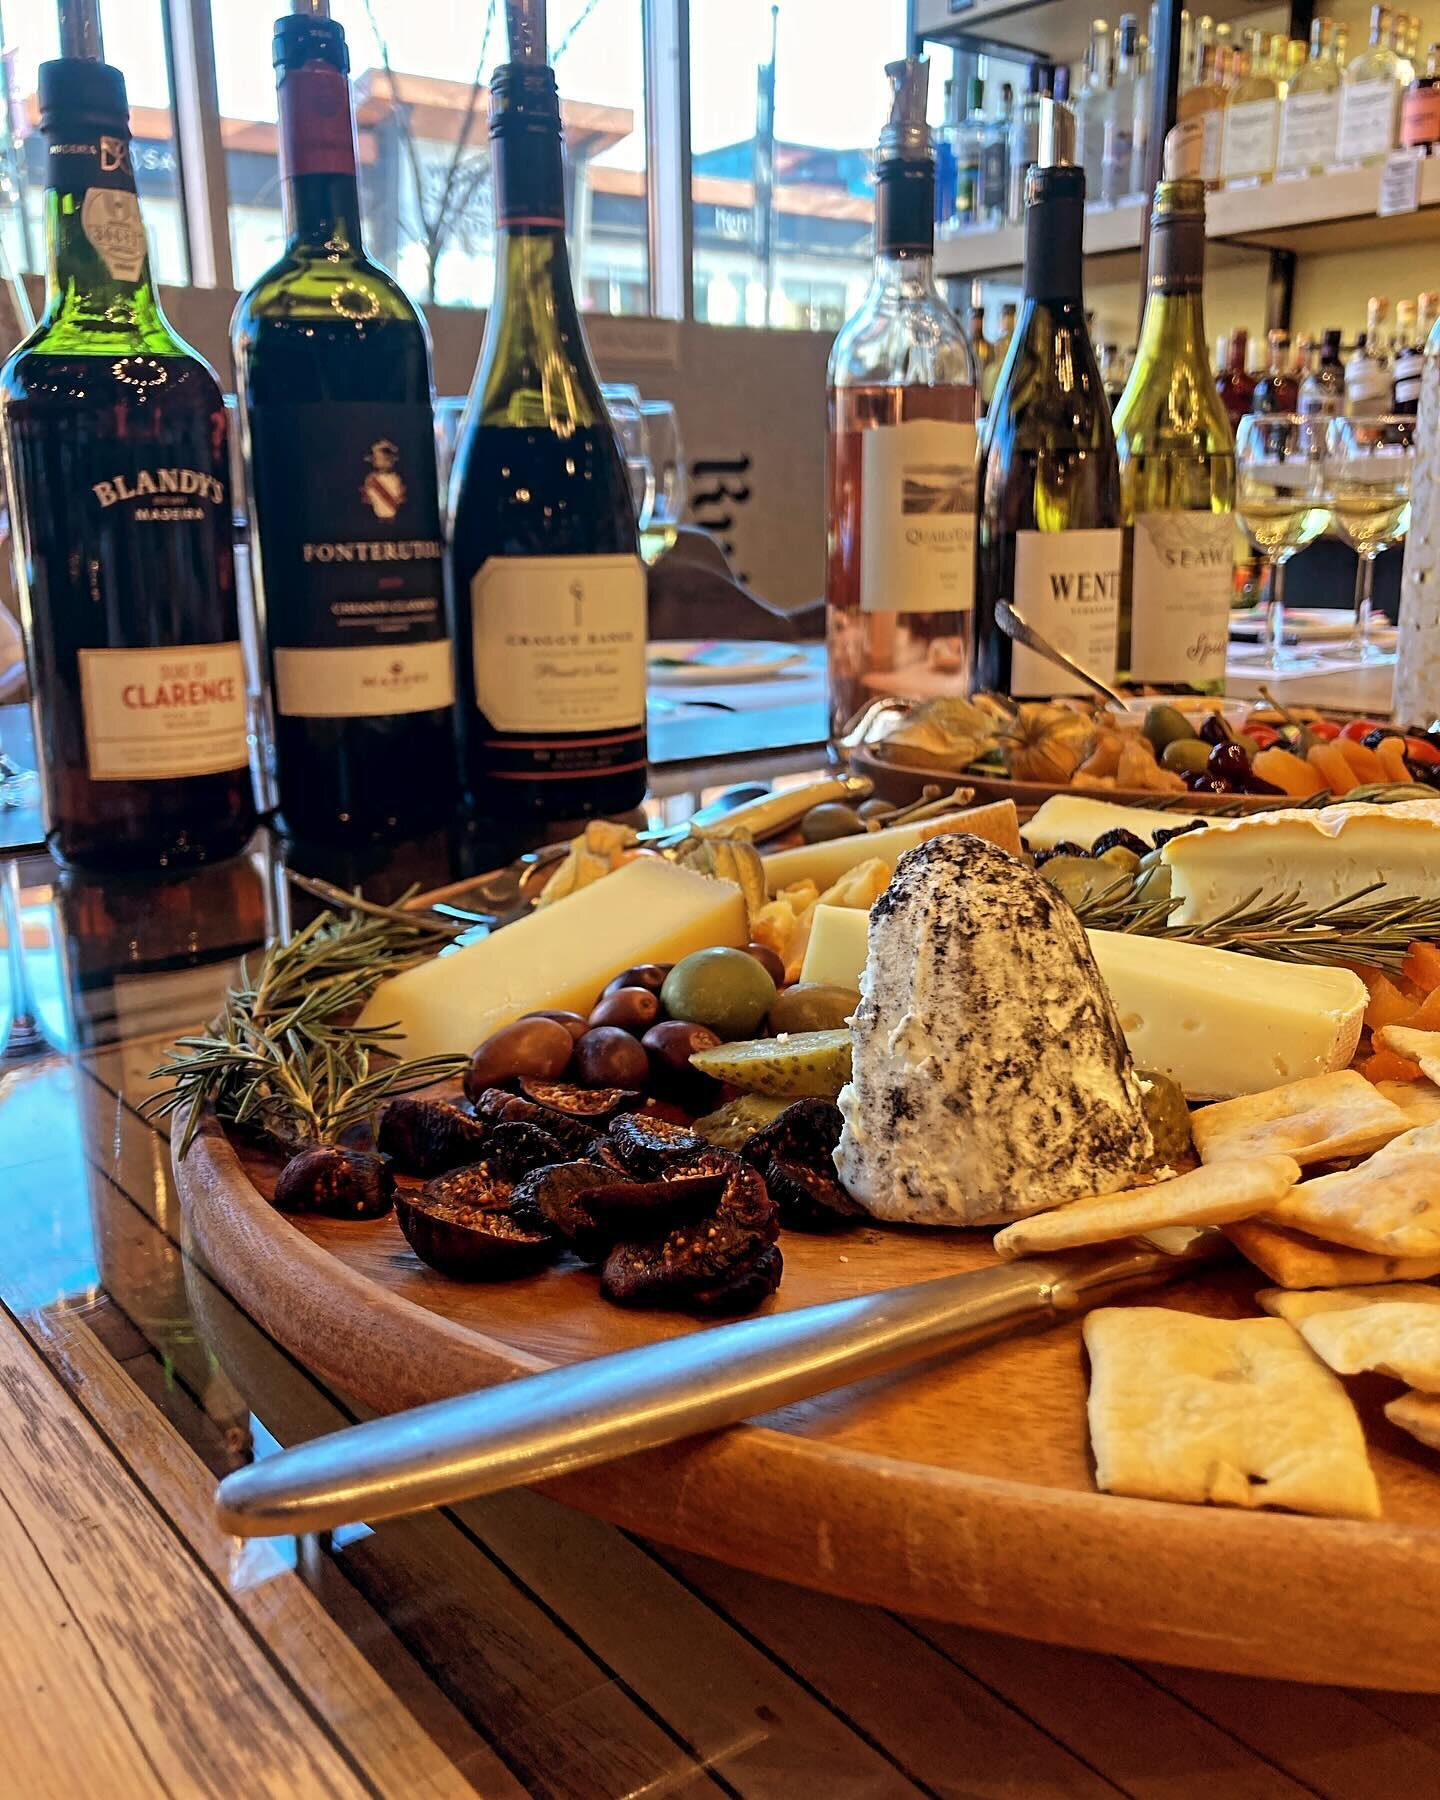 Hosting a corporate event called Team Building With Wine! Thank you @bin905wines for providing the lovely space and to @peasant_cheese for the sensational cheese platters. #cbcsoulvines #soulvinesomm #teambuilding #corporateevents #winetasting #chees